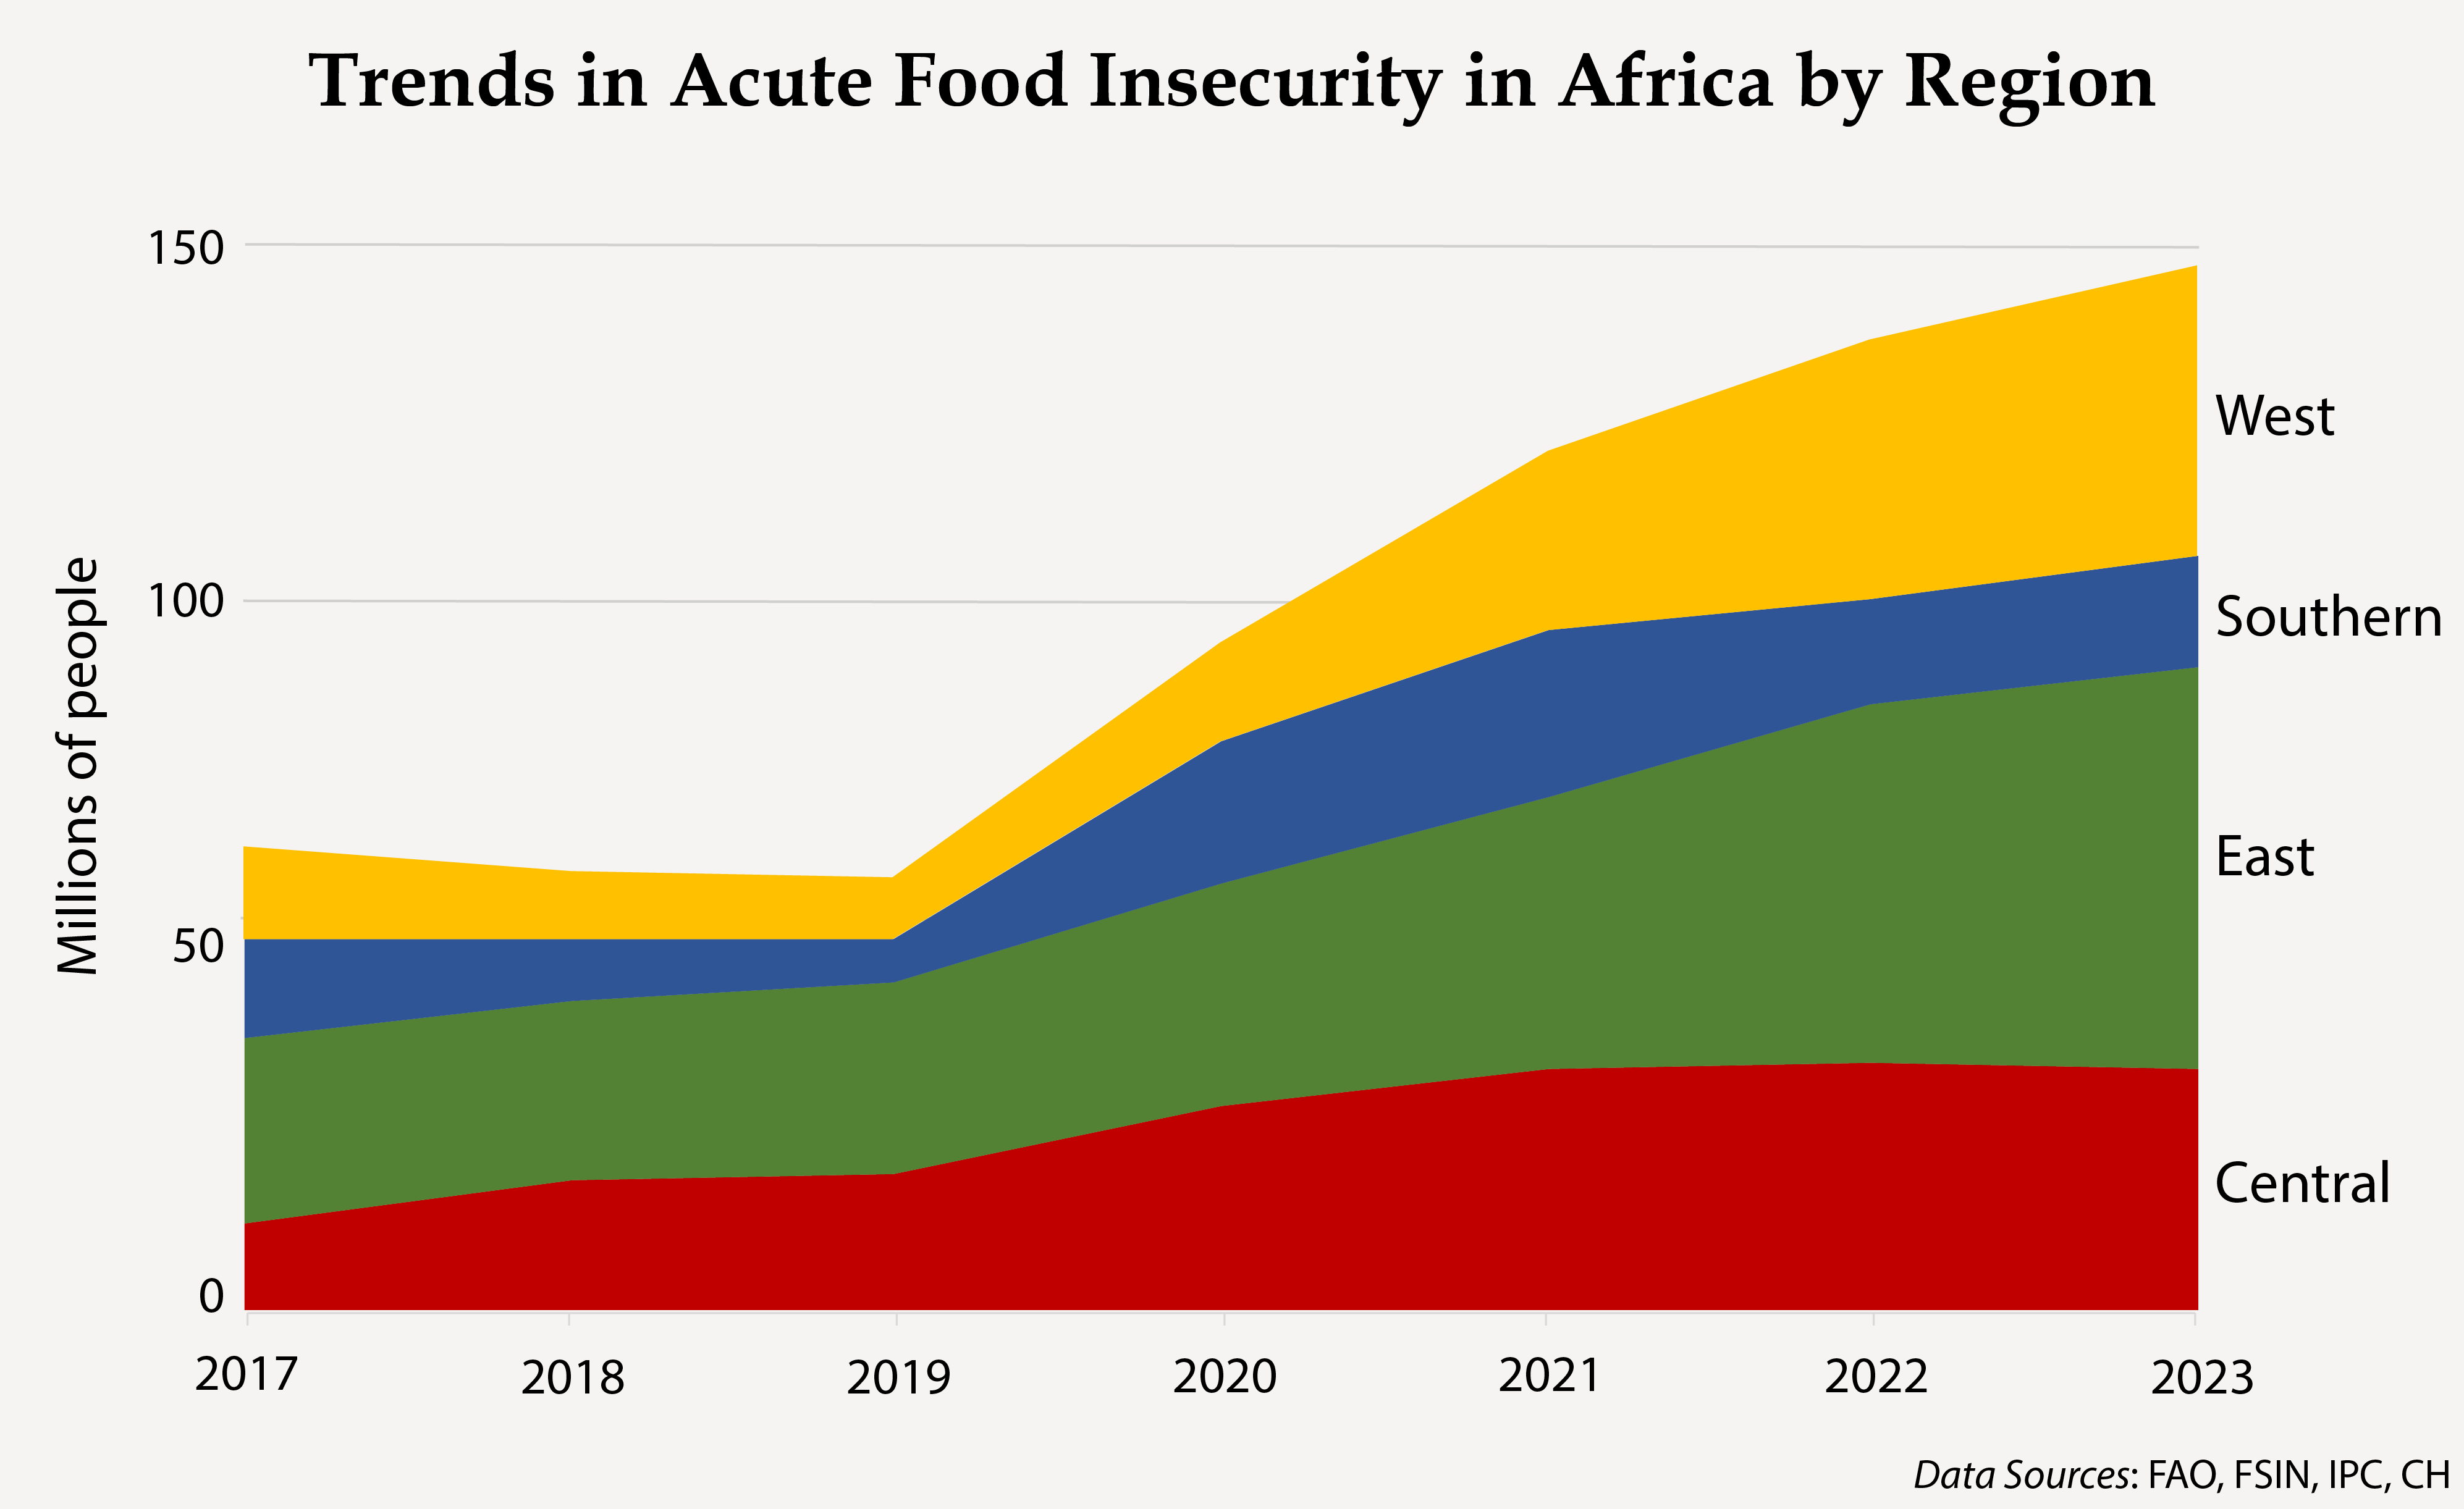 Trends in Acute Food Insecurity in Africa by Region